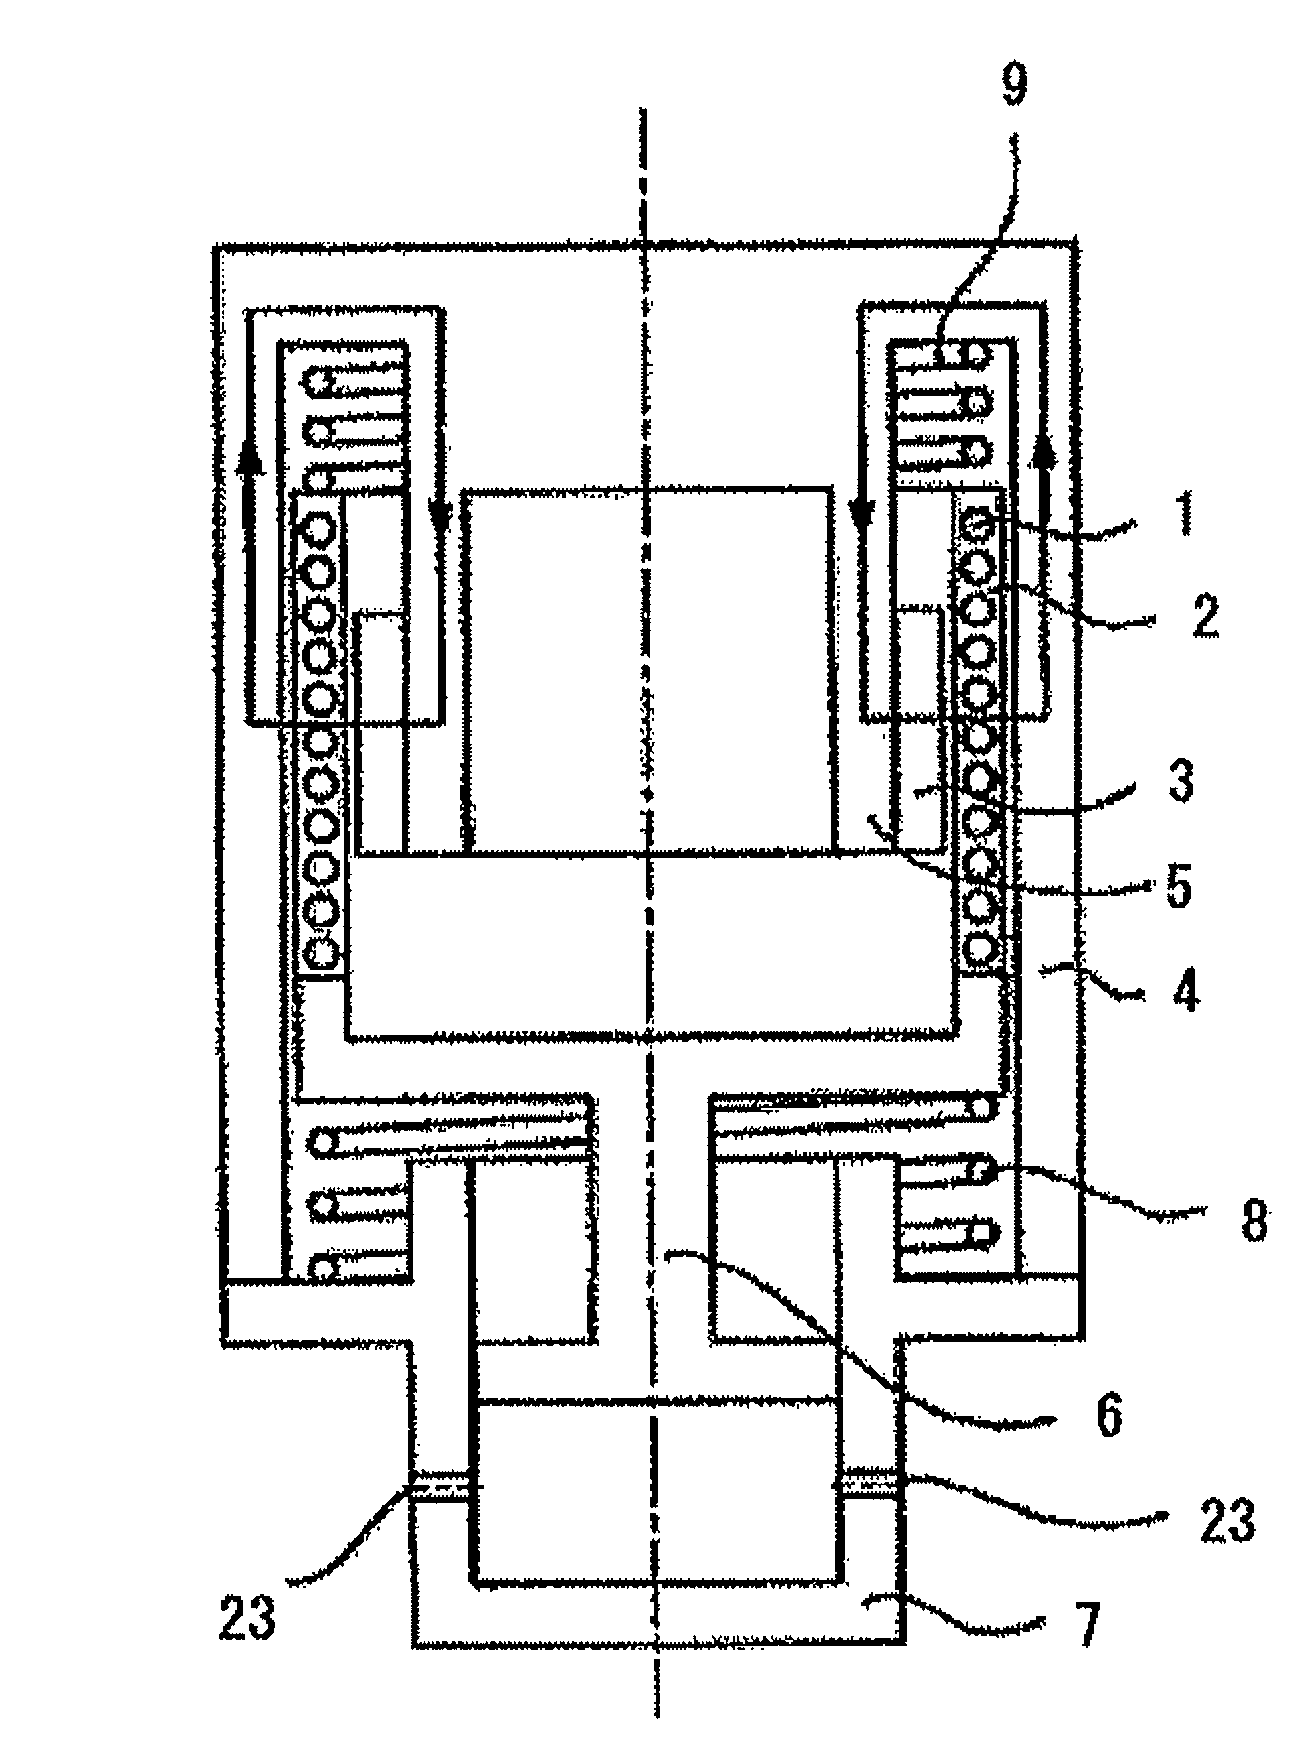 Linear motor, linear dynamo, reciprocation-type compressor driving system that is powered by linear motor, and charge system that uses linear dynamo